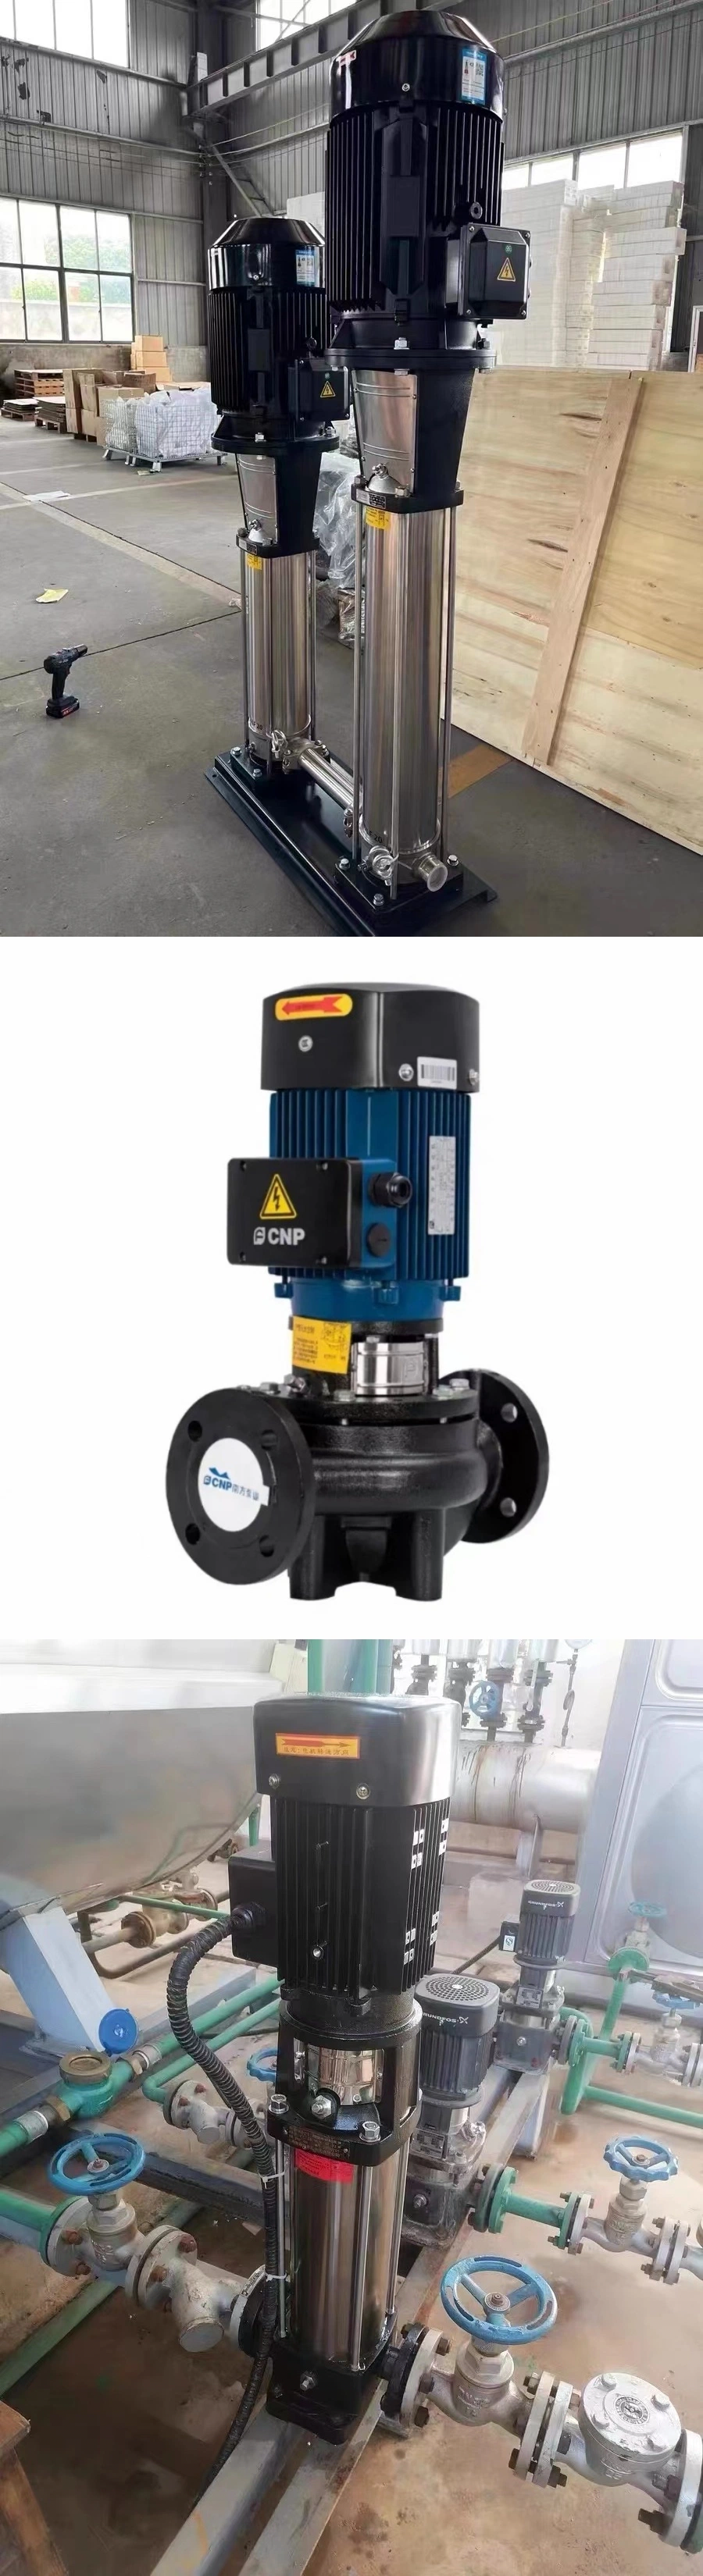 Vertical Multistage Feed Pump Efficient Water Treatment Energy Saving